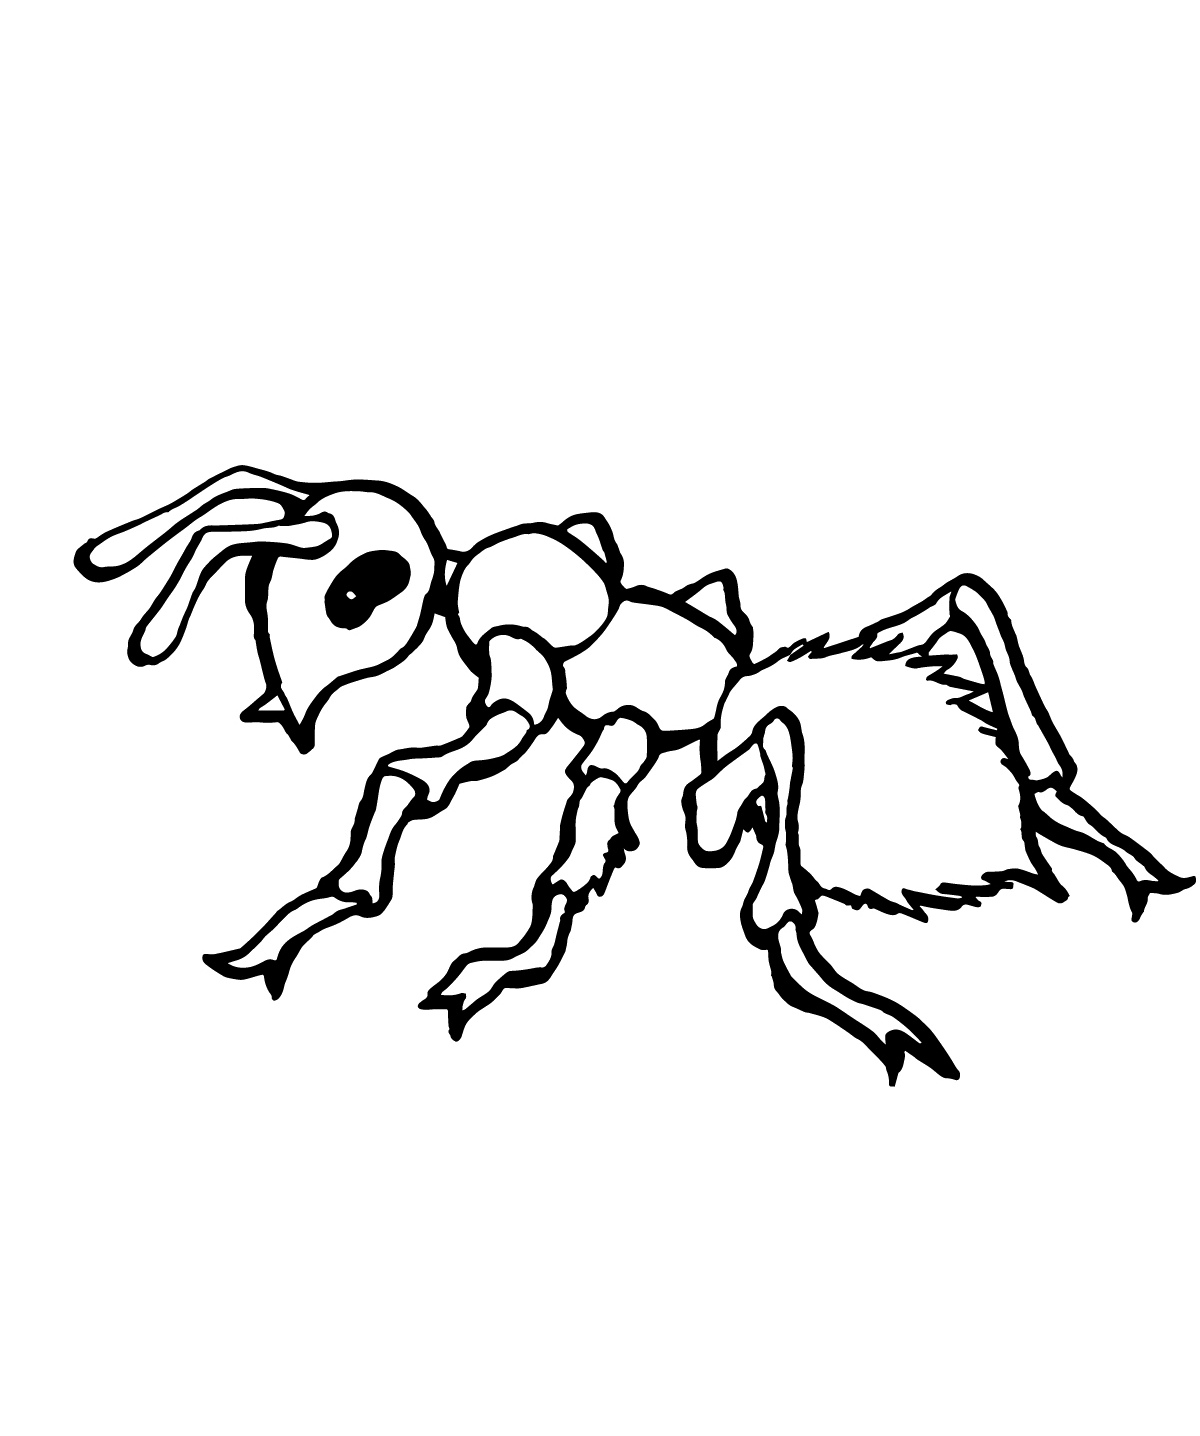 Ant coloring #9, Download drawings